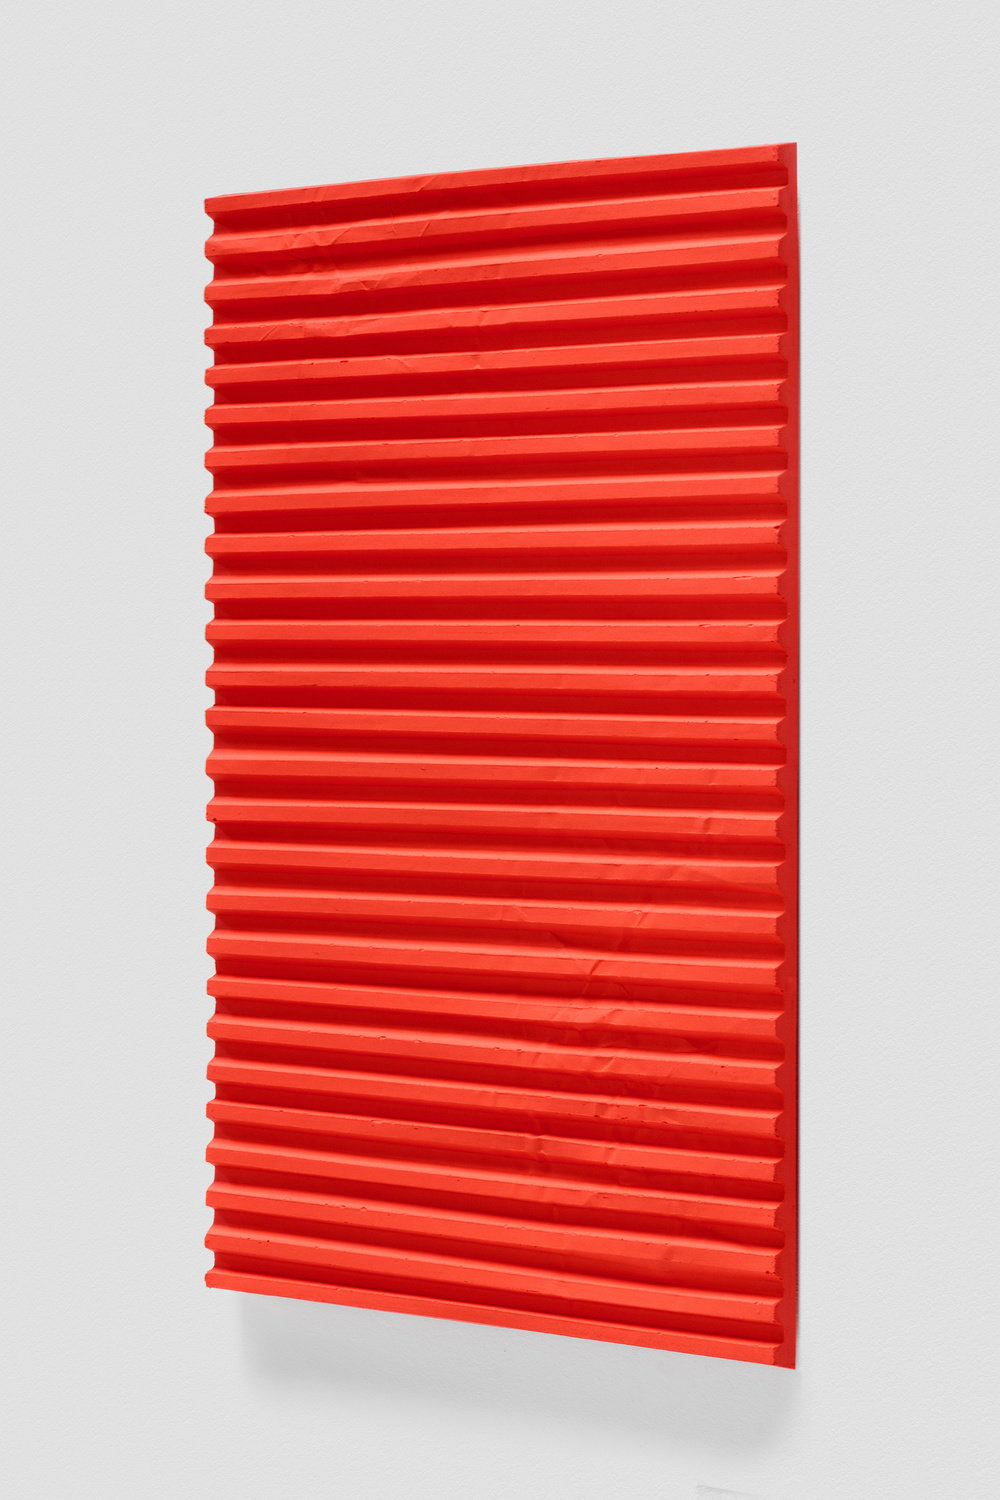 Hagen, autogenic relaxtion sequence (platform fold, naphthol red, cadmium red light) (view 2), 2018 2019, mixed media, 36 x 24 x 1 1 2 in., 91.4 x 61 x 3.8 cm, cnon 60.899 joshua wilson white